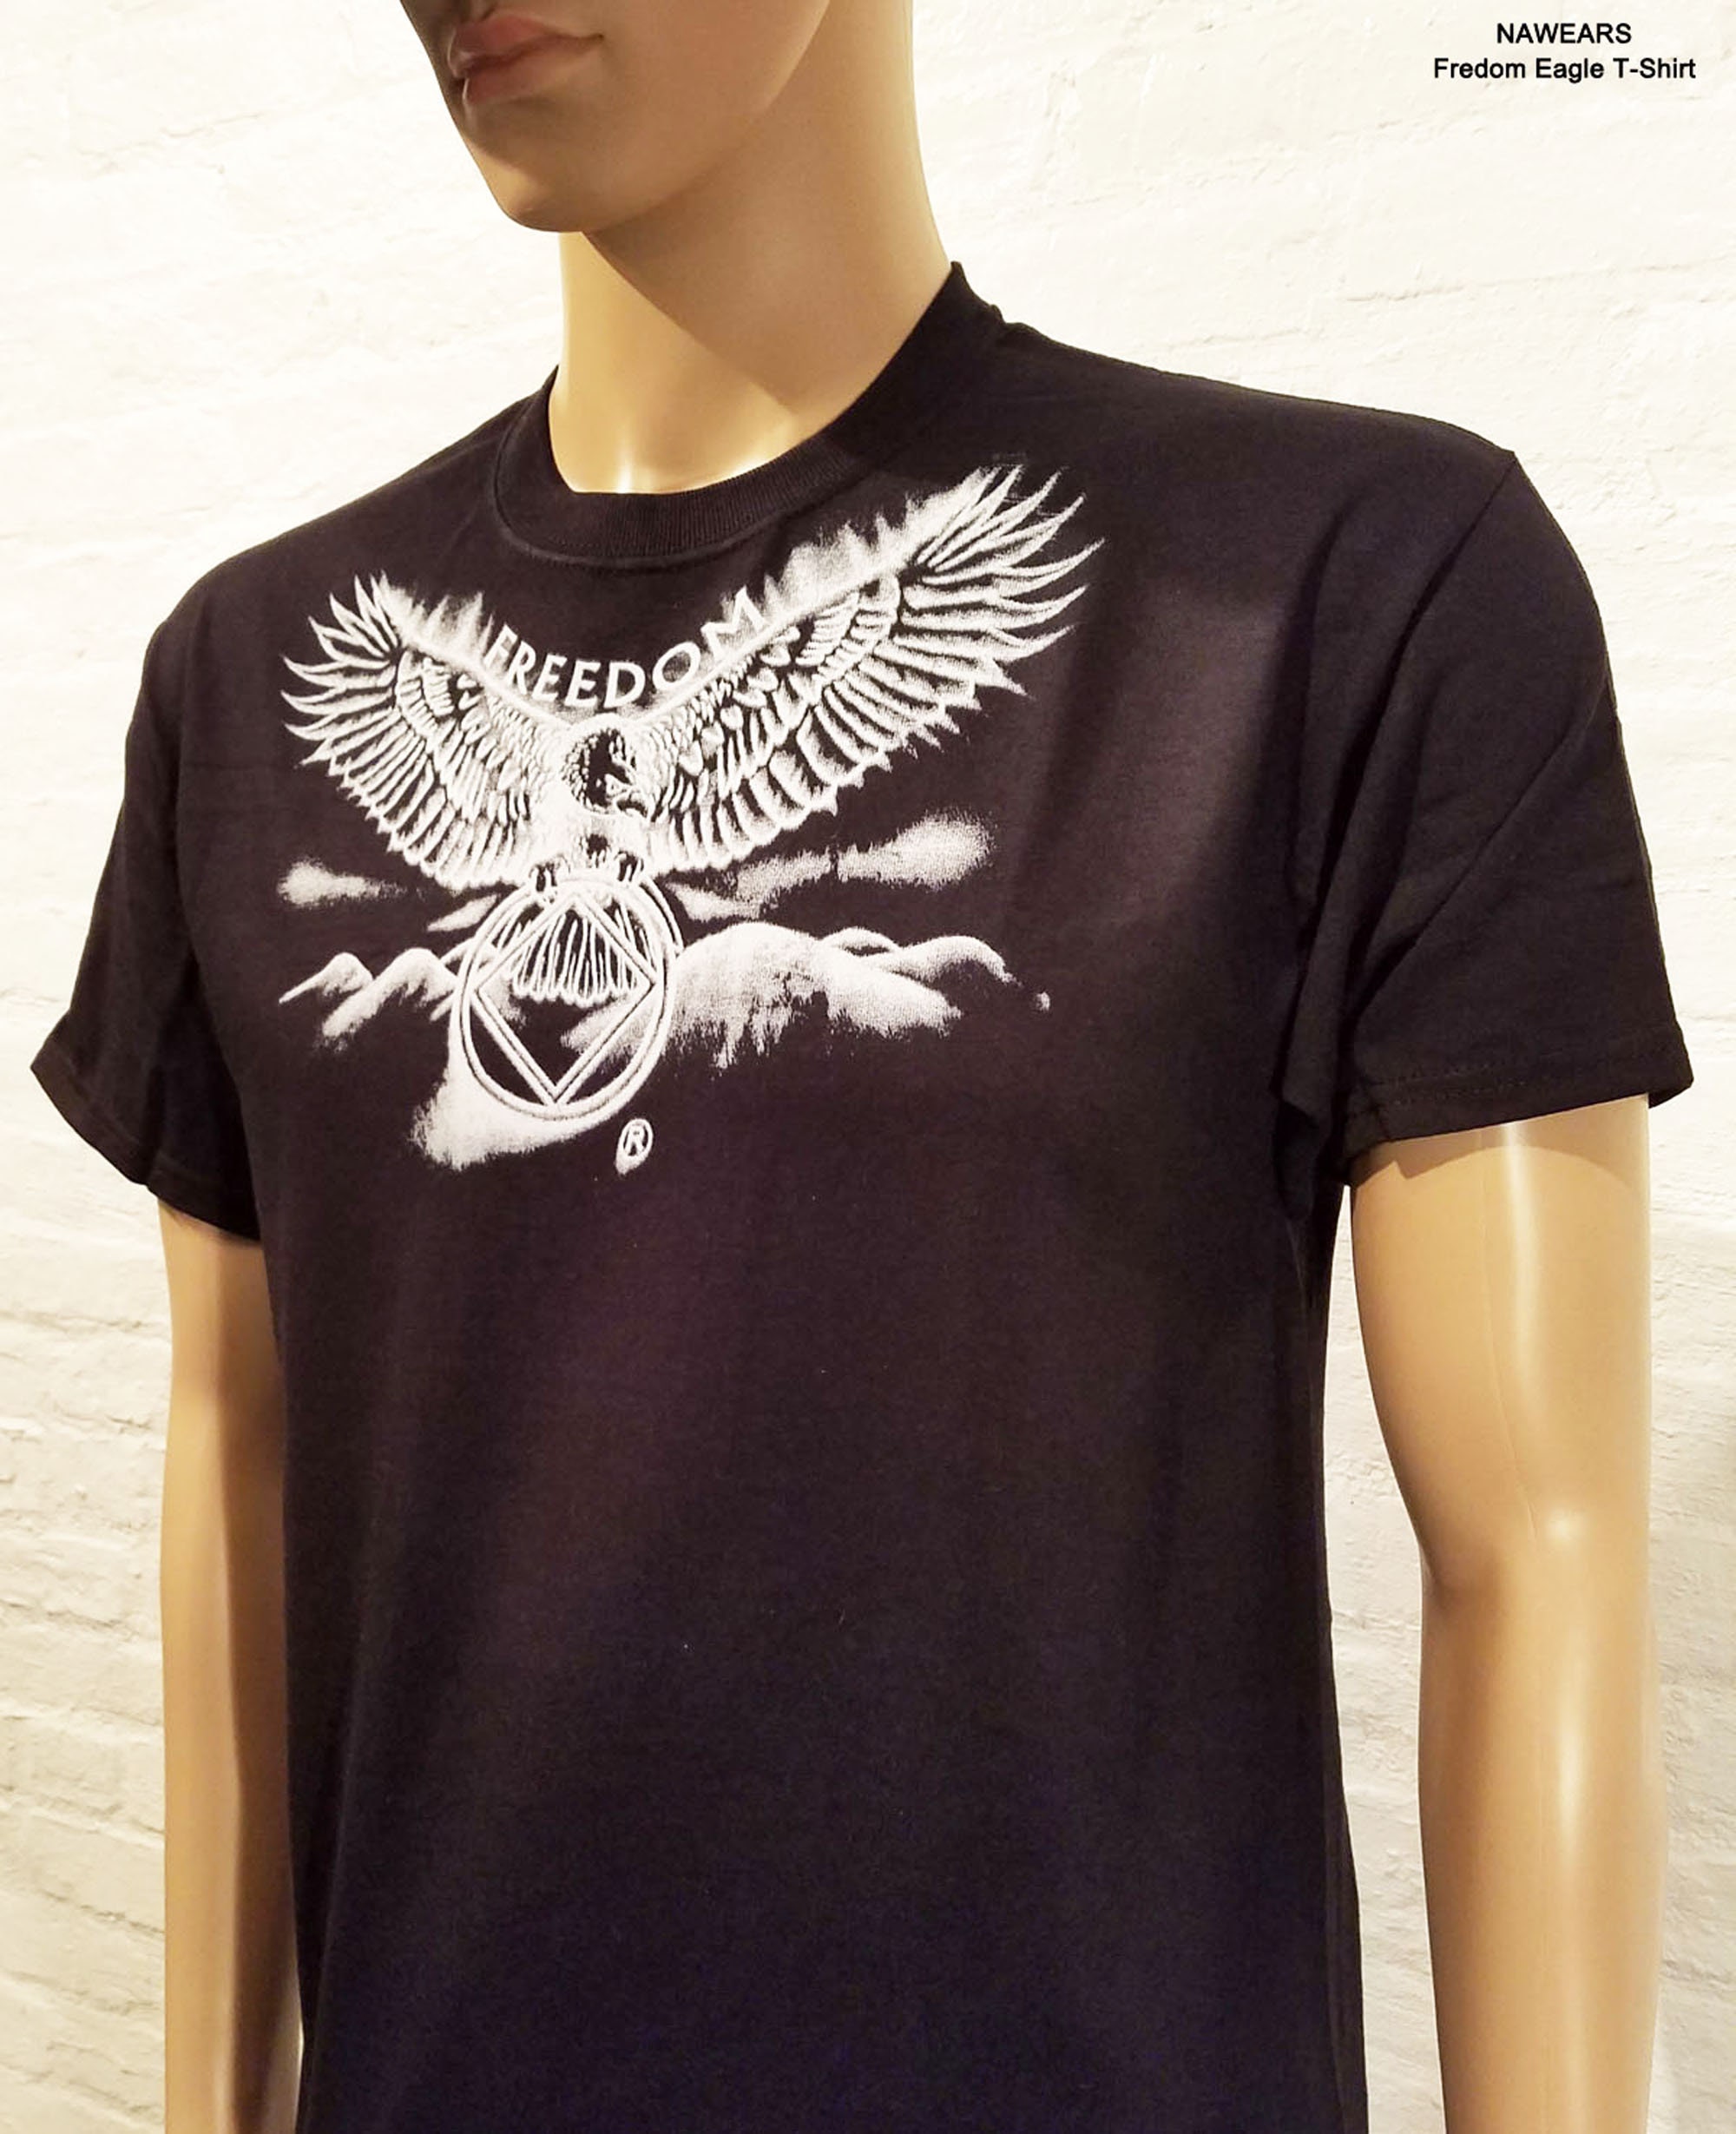 NA FREEDOM EAGLE  Black 100% Cotton T-Shirt Narcotics Anonymous